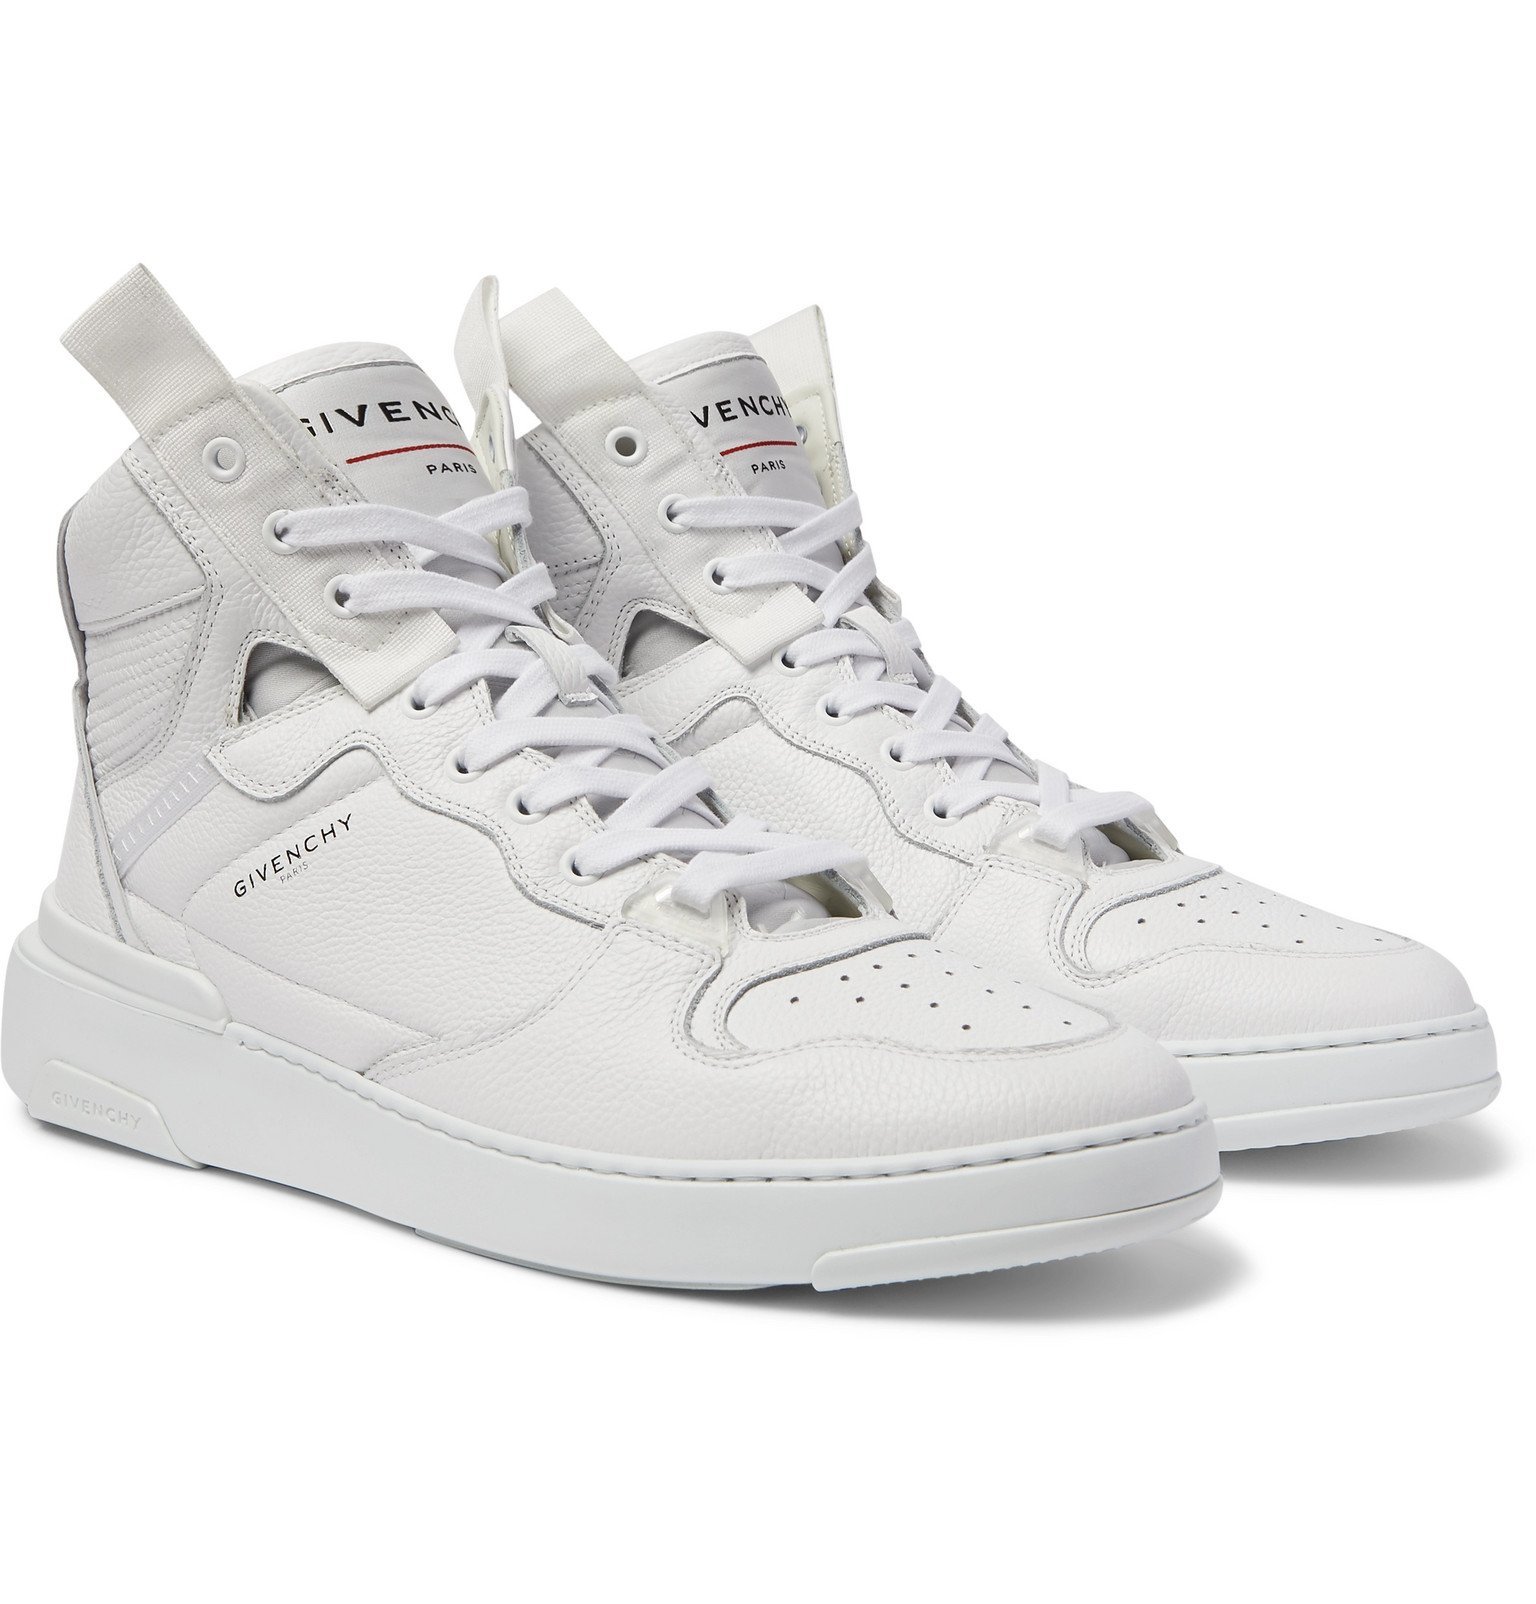 Givenchy - Wing Grosgrain-Trimmed Full-Grain Leather High-Top Sneakers -  White Givenchy